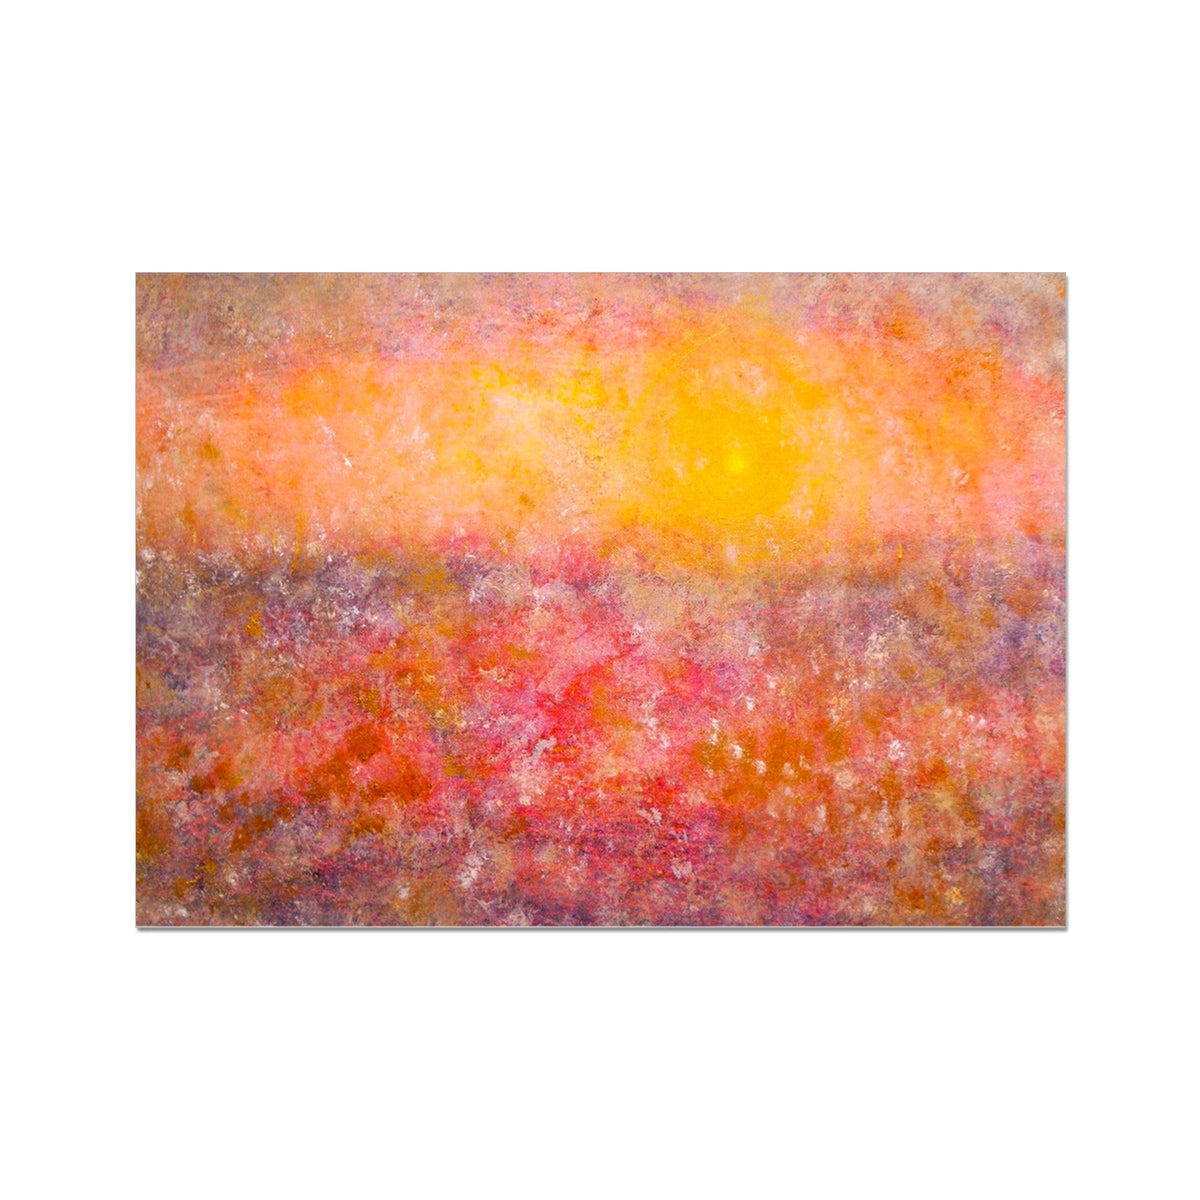 Sunrise Mist Horizon Abstract Painting | Fine Art Prints From Scotland-Unframed Prints-Abstract & Impressionistic Art Gallery-A2 Landscape-Paintings, Prints, Homeware, Art Gifts From Scotland By Scottish Artist Kevin Hunter